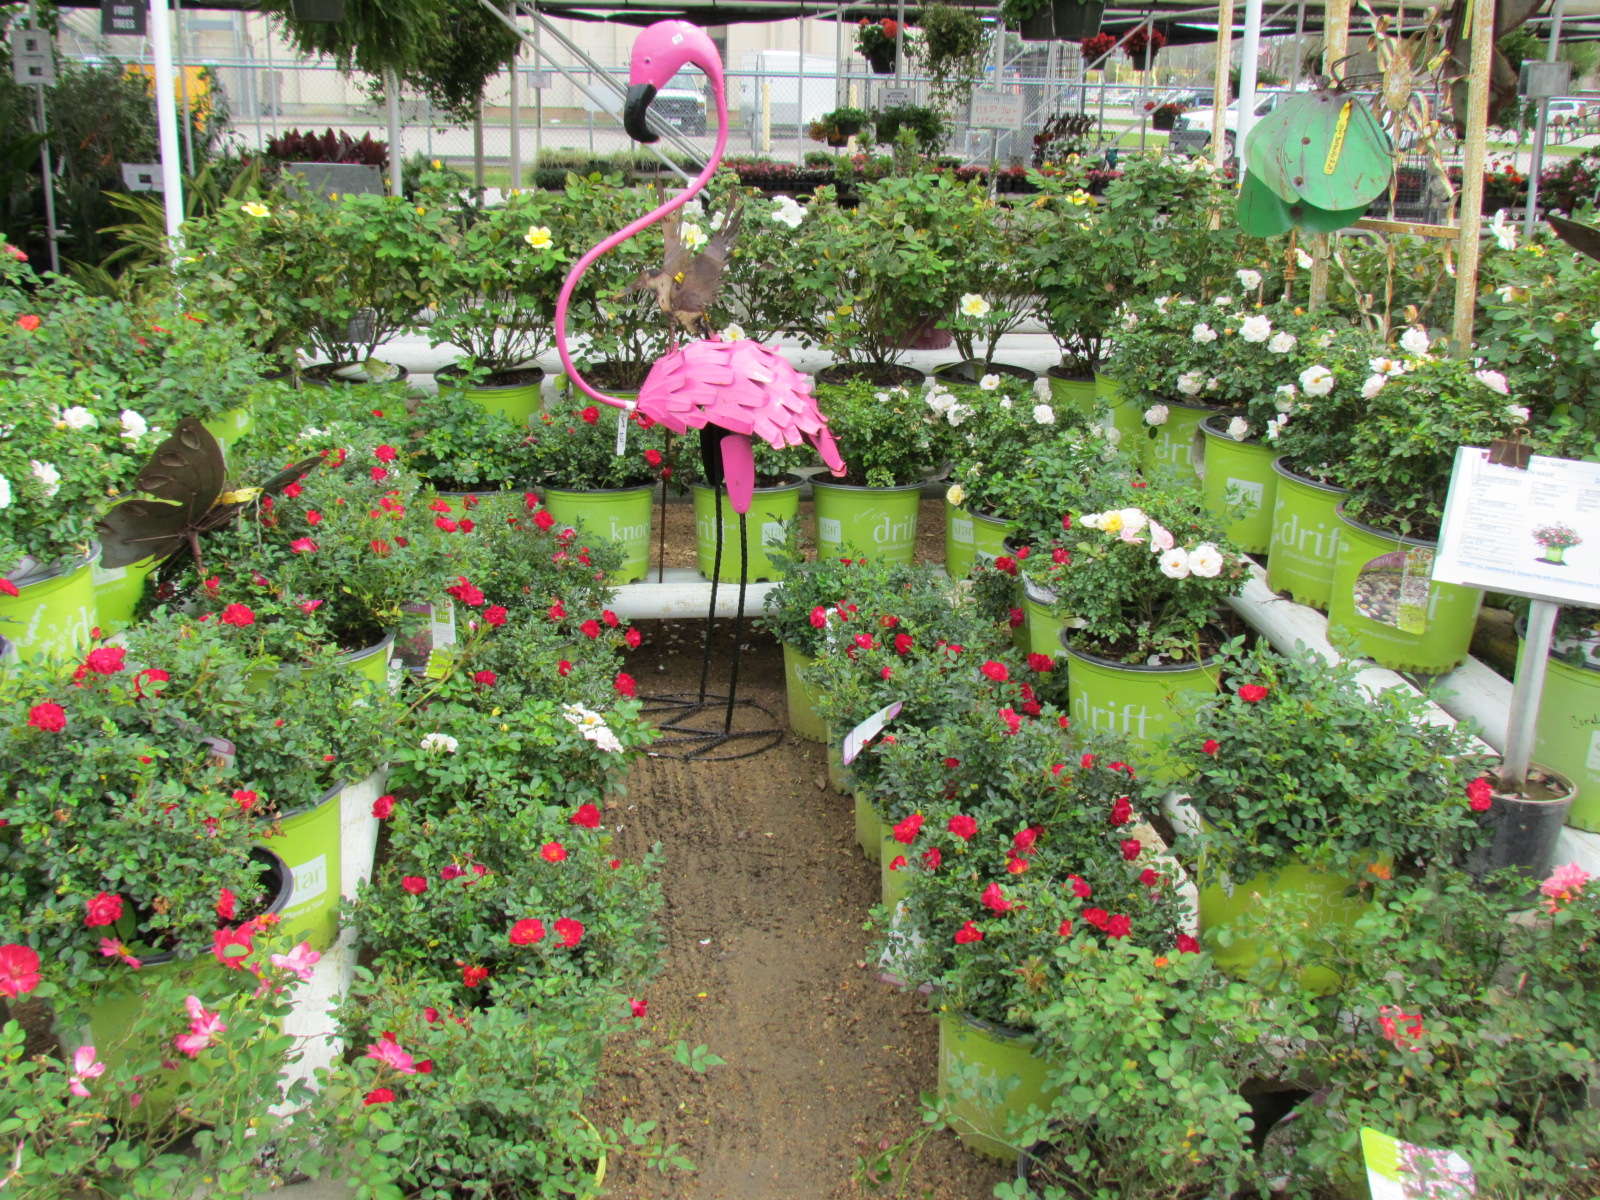 Large variety of shrubs including Encore Azaleas, Boxwoods, Yaupons, Crotons, Drift Roses and more at J&J Nursery, Spring, TX